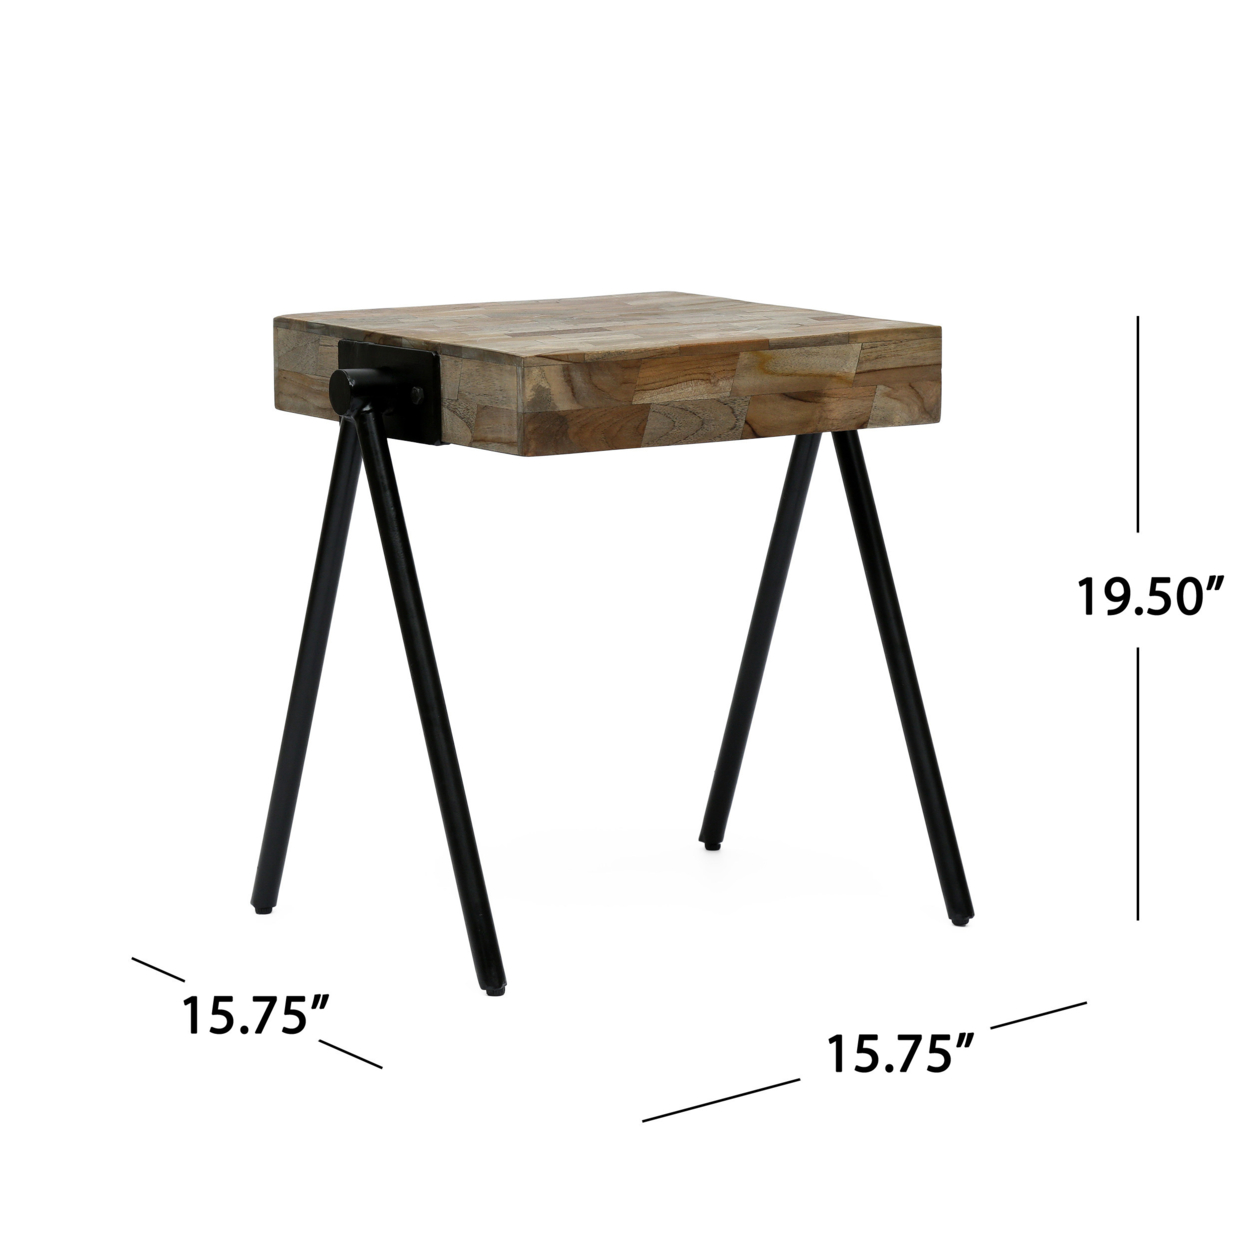 Delliah Handcrafted Modern Industrial Mango Wood Side Table